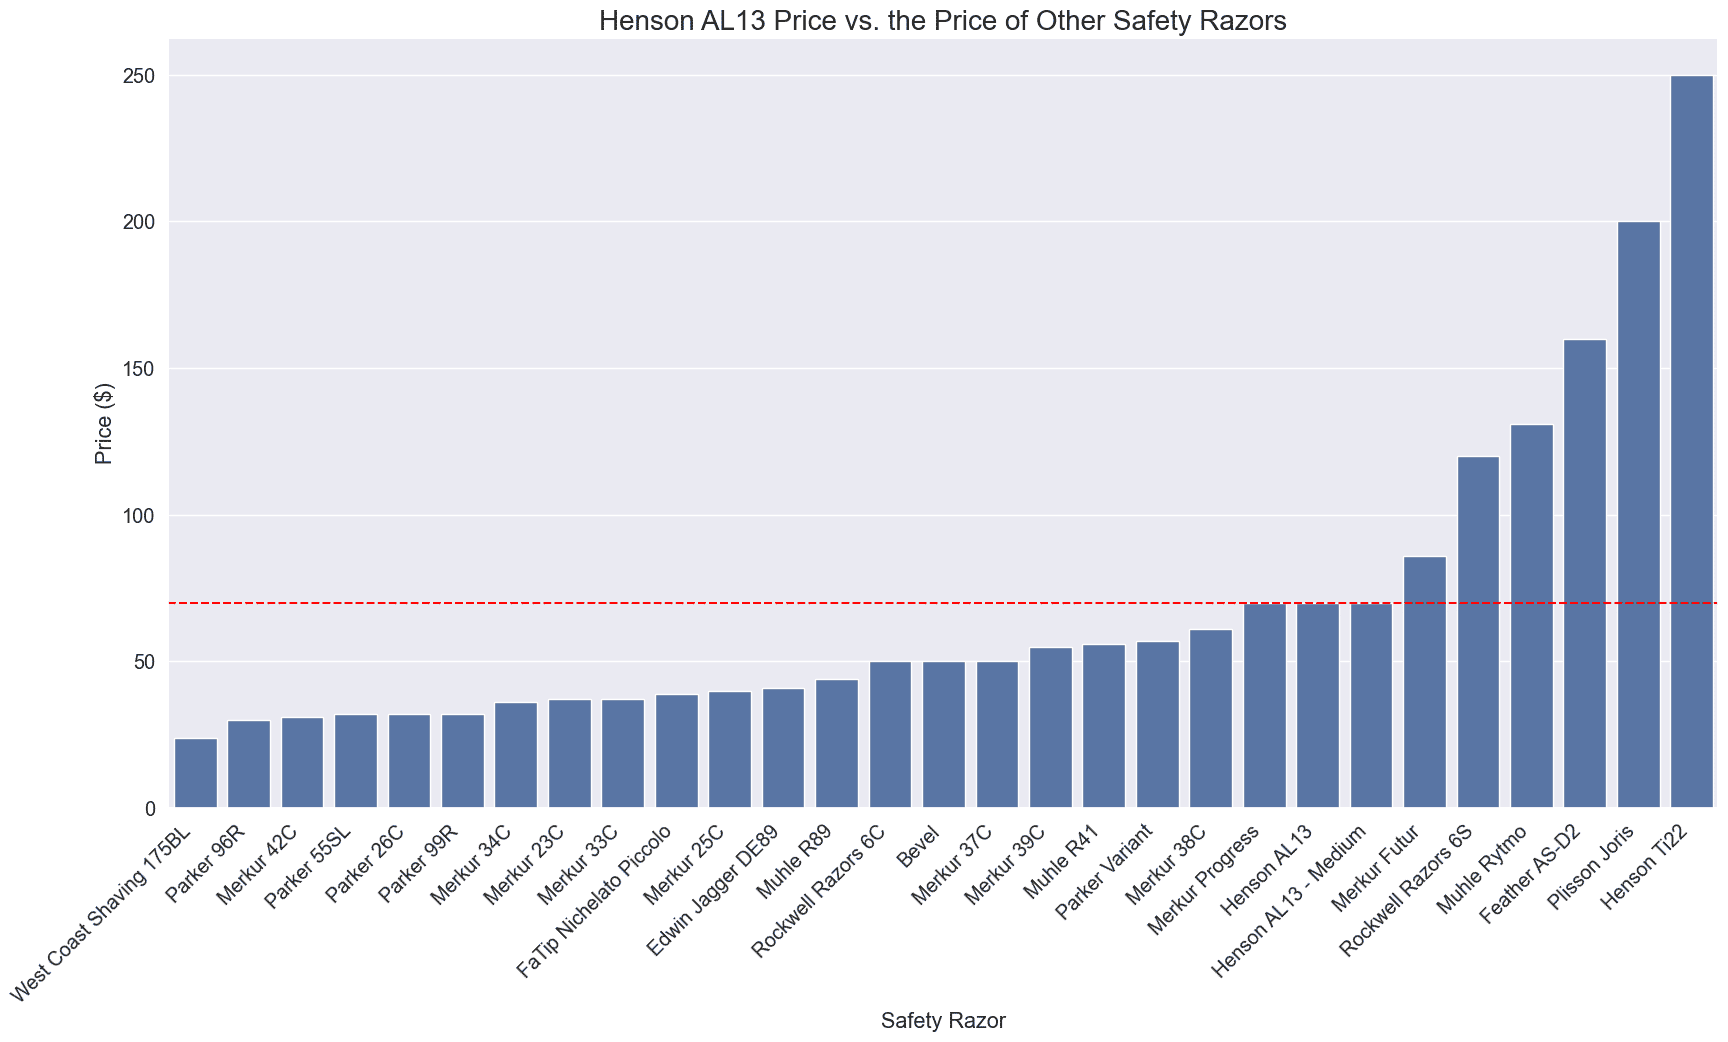 price of henson al13 compared to other safety razors